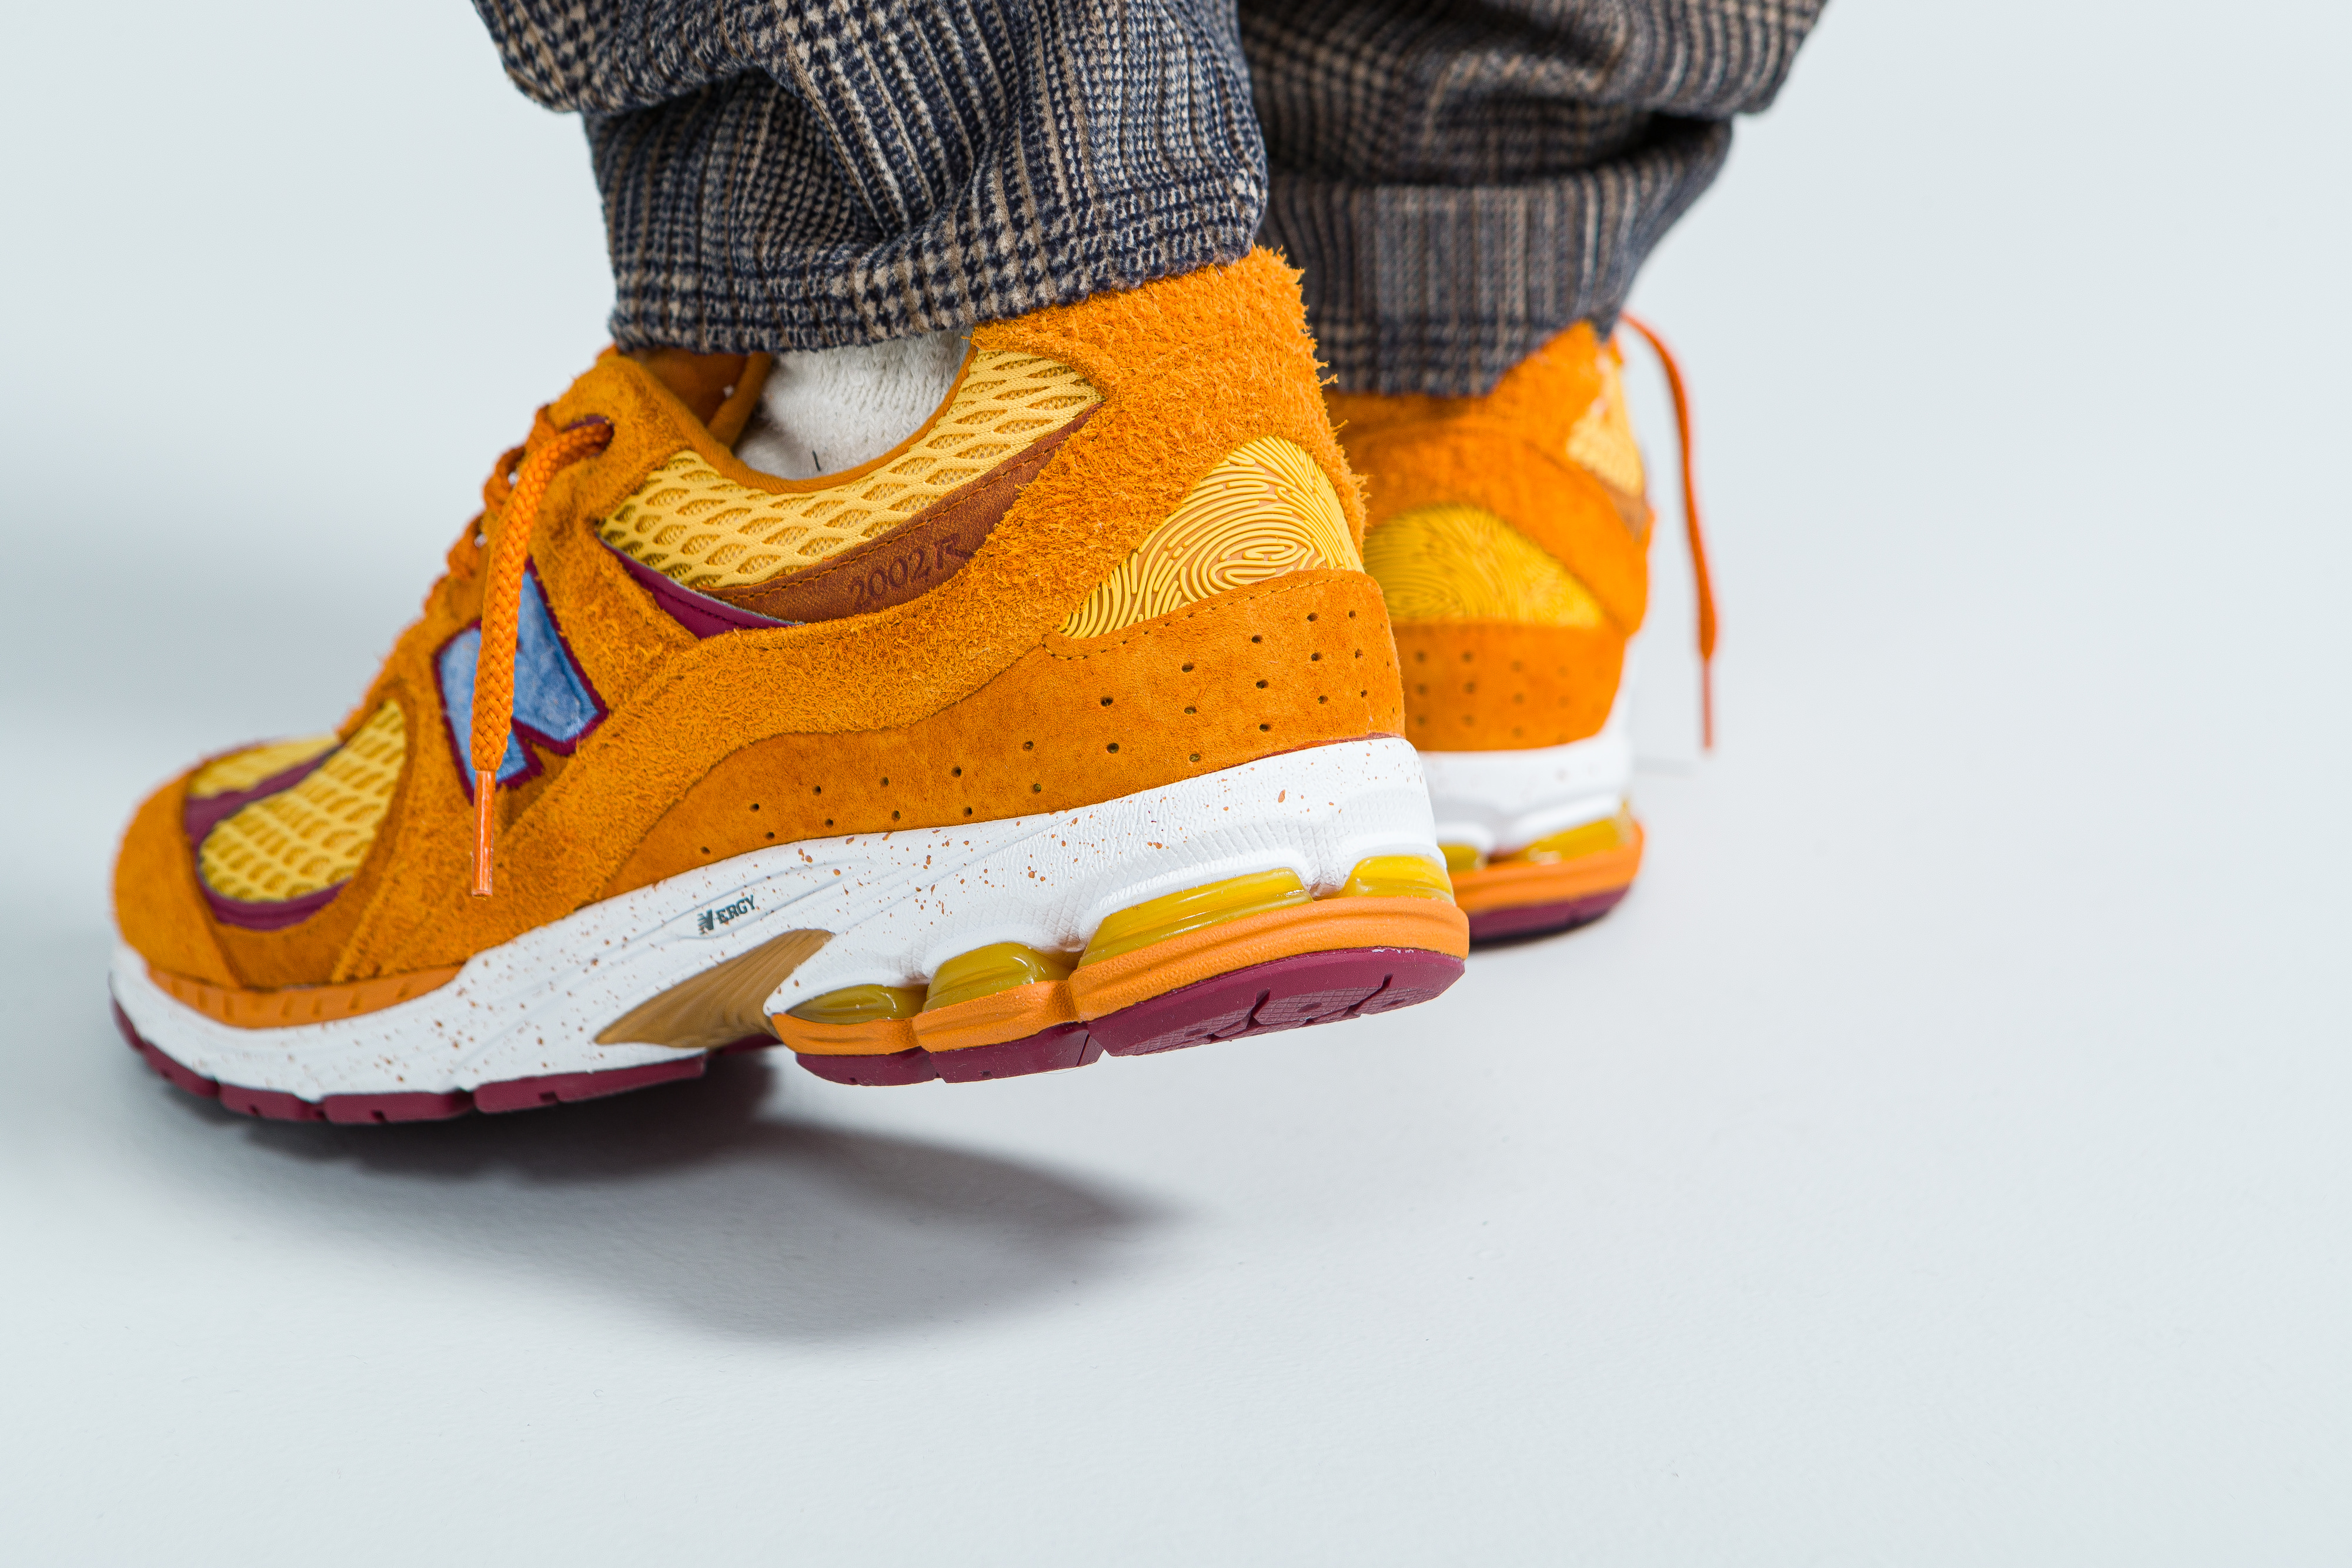 Up There Launches - New Balance X Salehe Bembury 2002R 'Peace Be The Journey'
